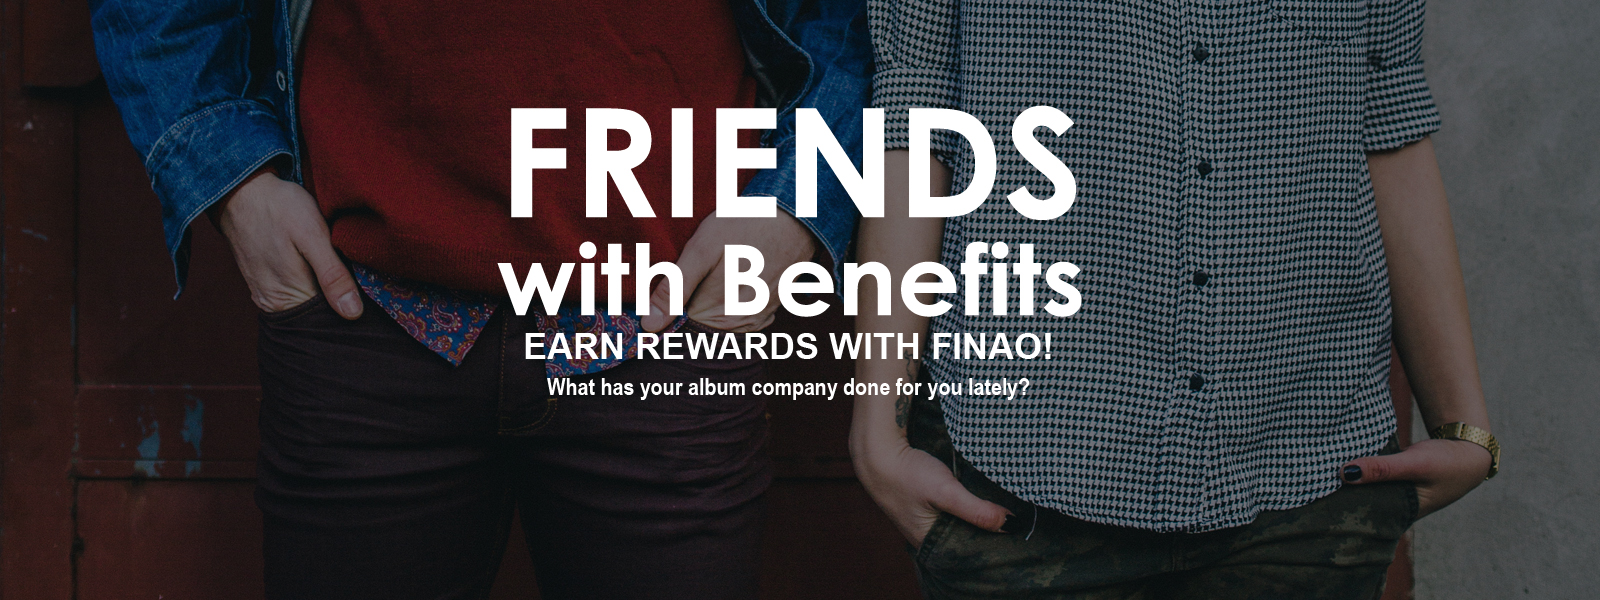 Friends with Benefits: earn rewards with Finao!